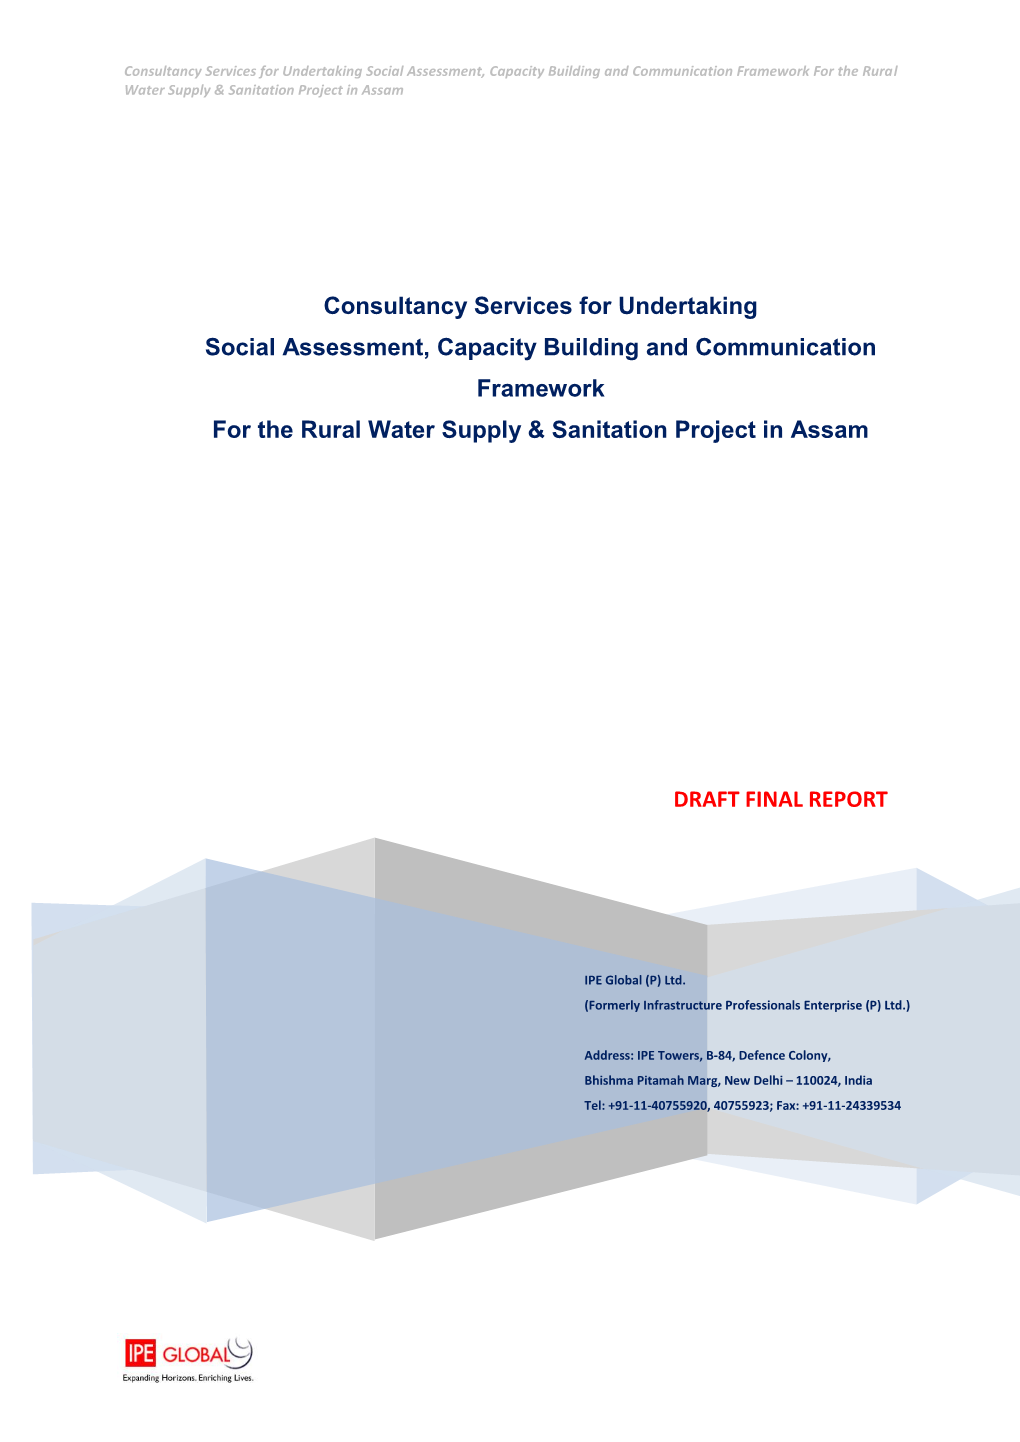 Consultancy Services for Undertaking Social Assessment, Capacity Building and Communication Framework for the Rural Water Supply & Sanitation Project in Assam